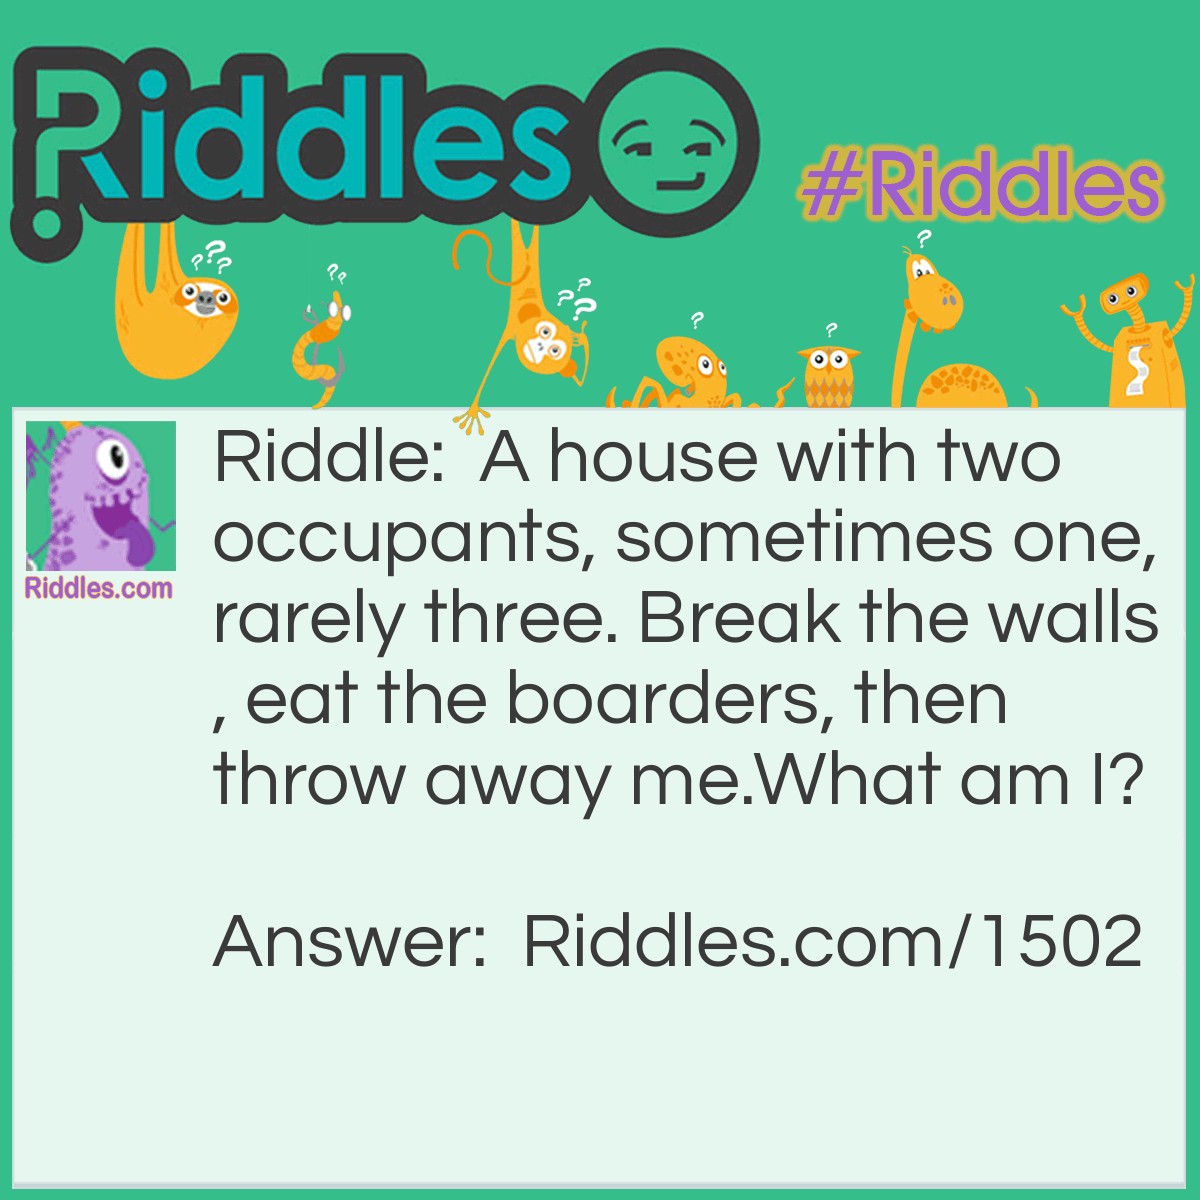 Riddle: A house with two occupants, sometimes one, rarely three. Break the walls, eat the borders, then throw away me.
What am I? Answer: A Peanut.